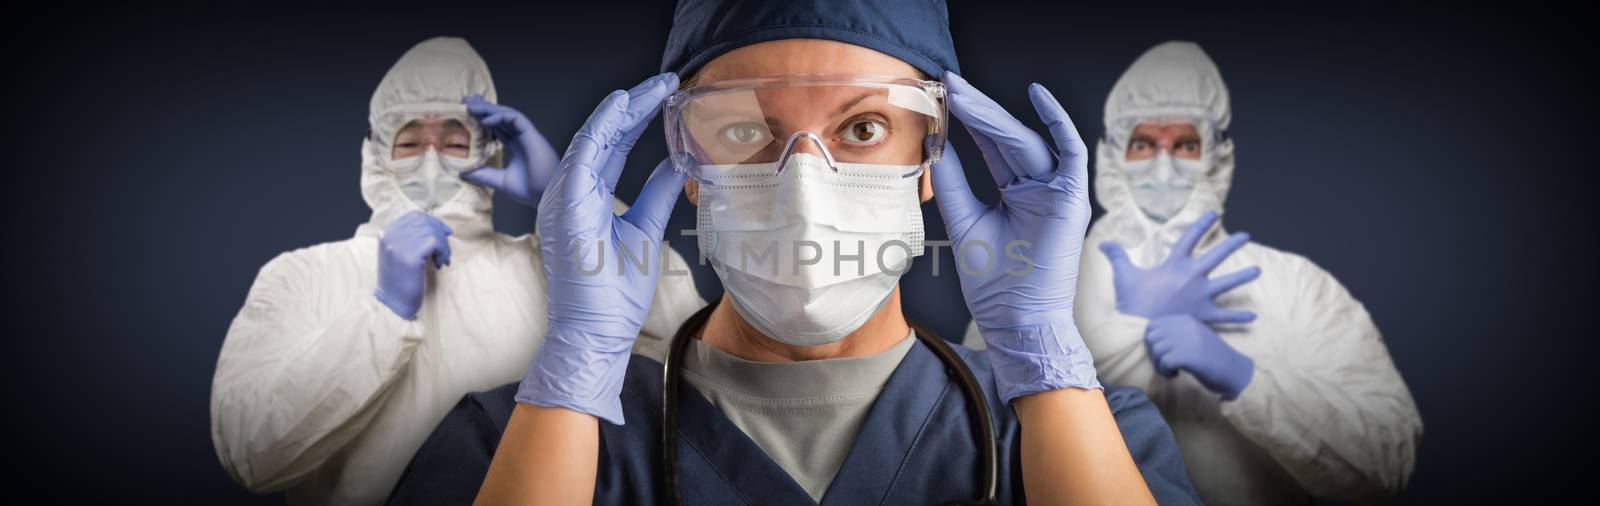 Team of Female and Male Doctors or Nurses Wearing Protective Medical Face Masks and Goggles Banner.